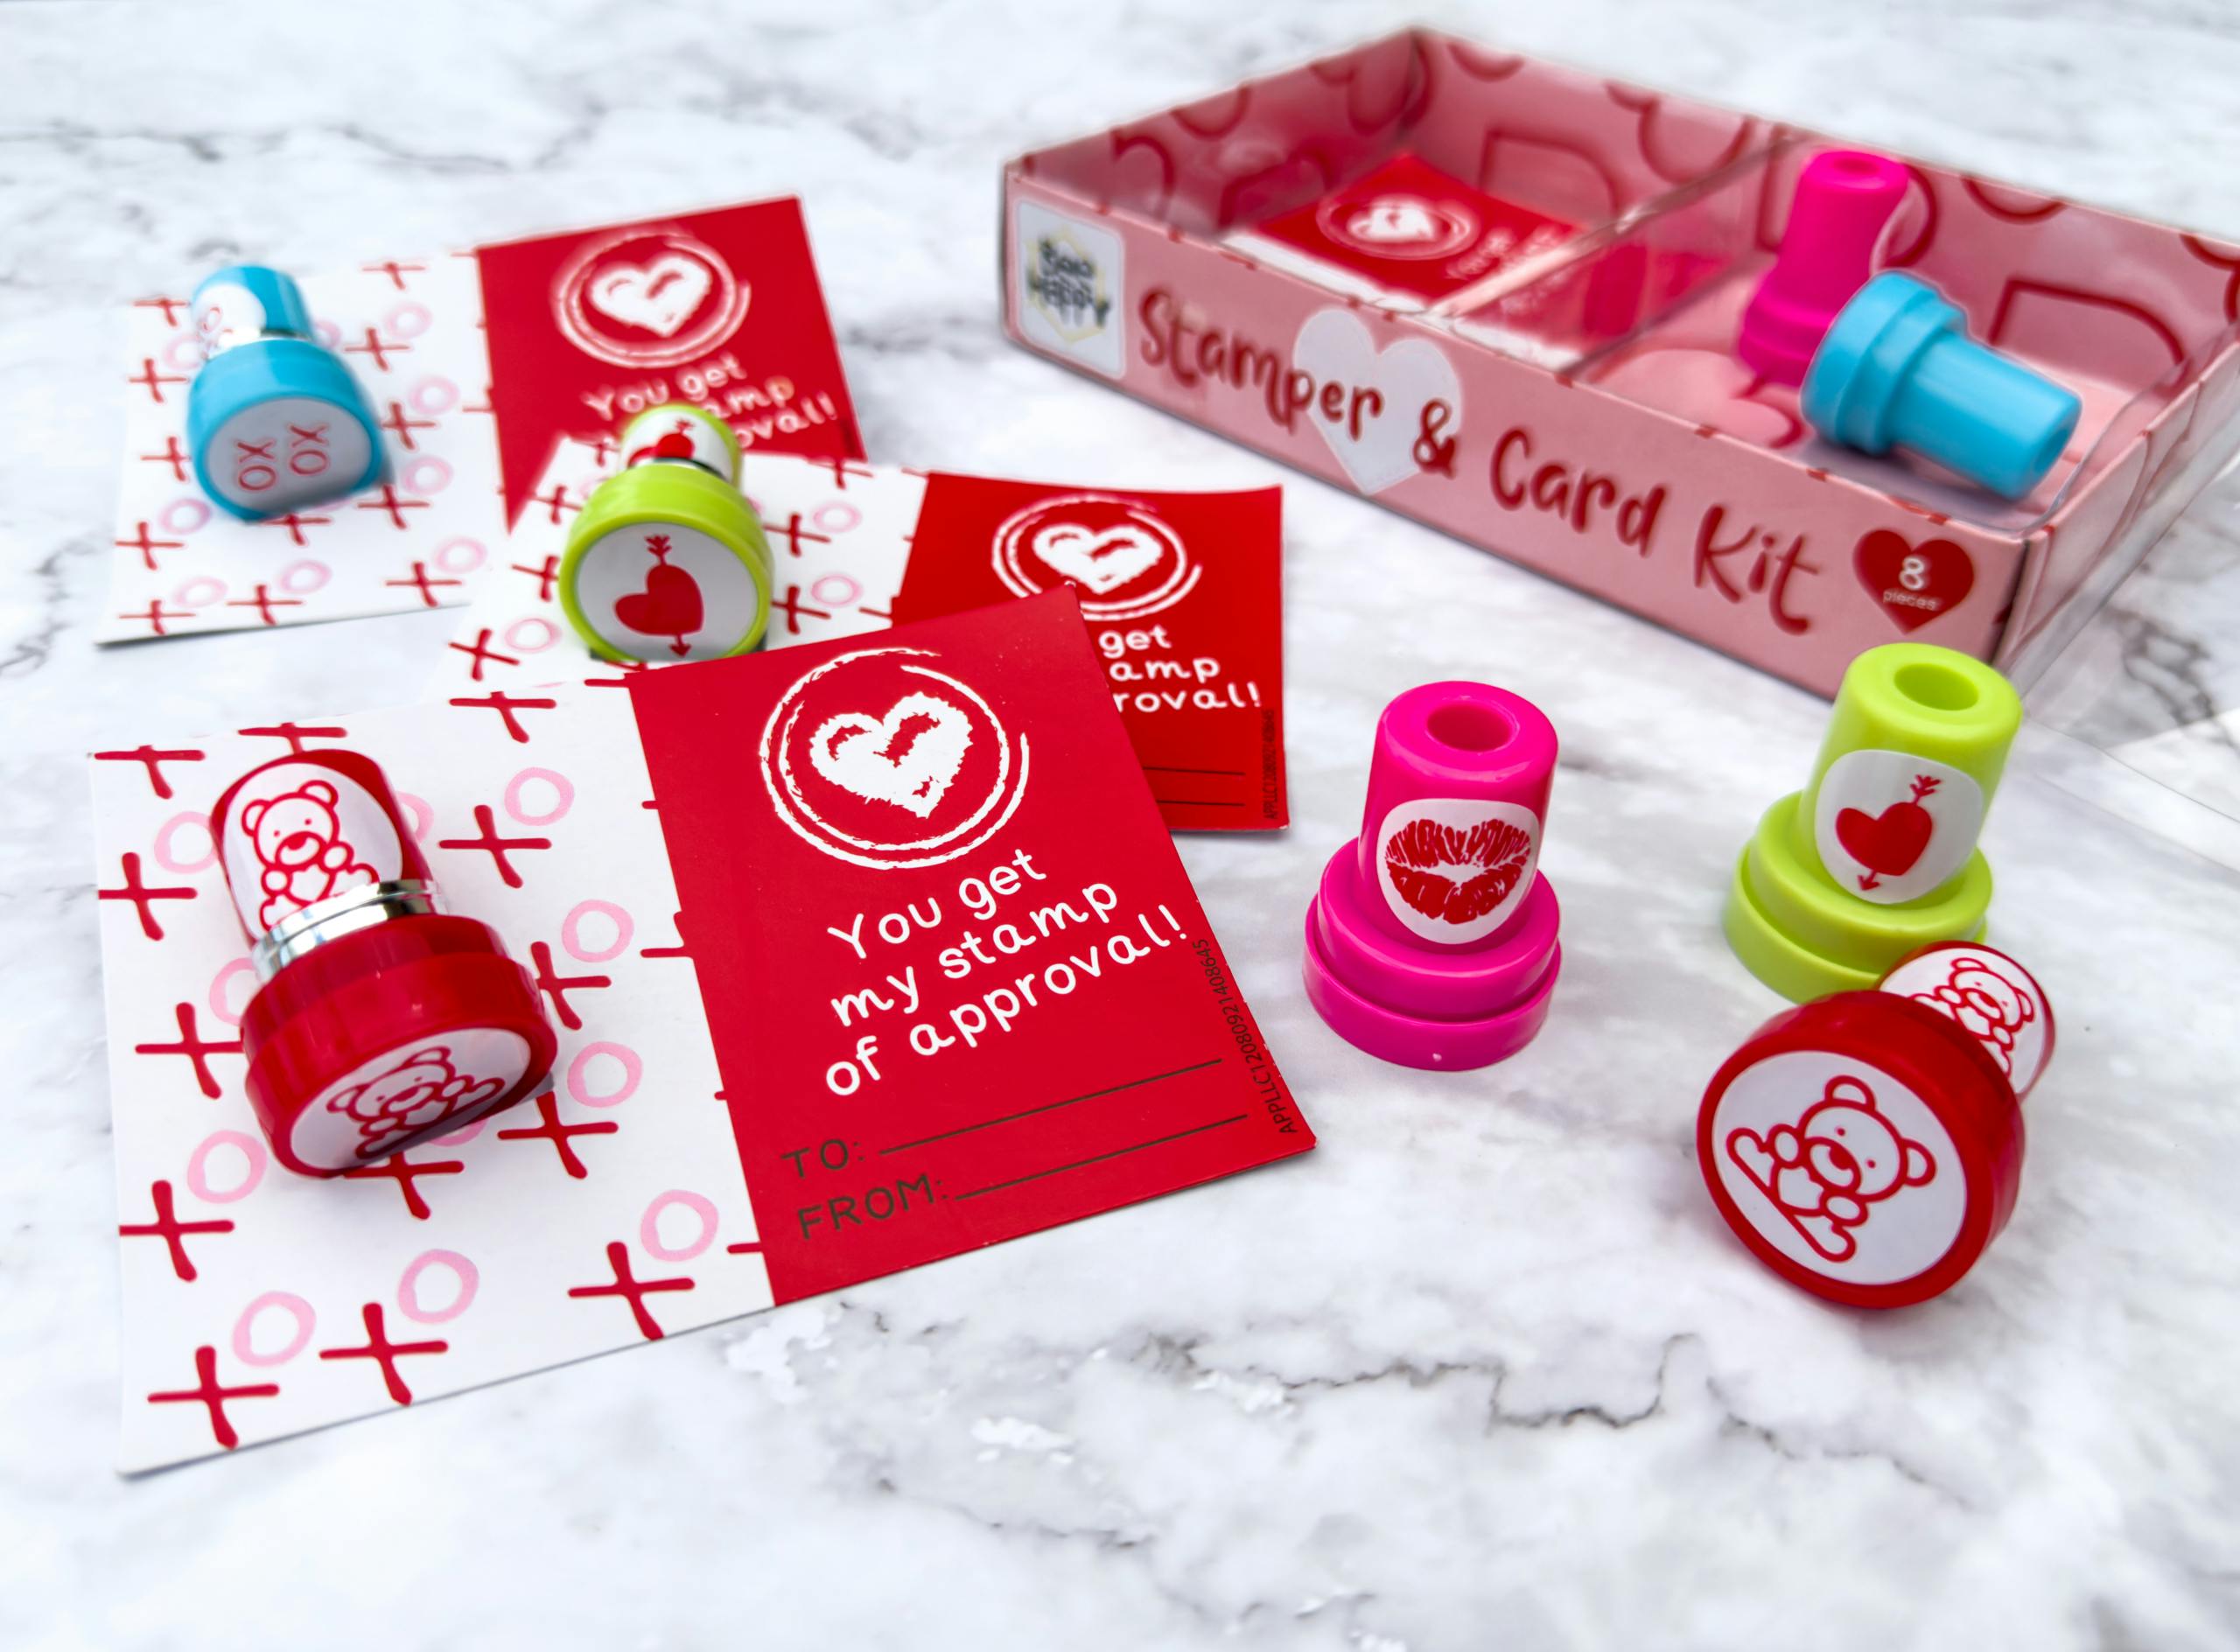 Someone working on putting together the cards from the Aldi Valentine's day Stamper kit on a counter